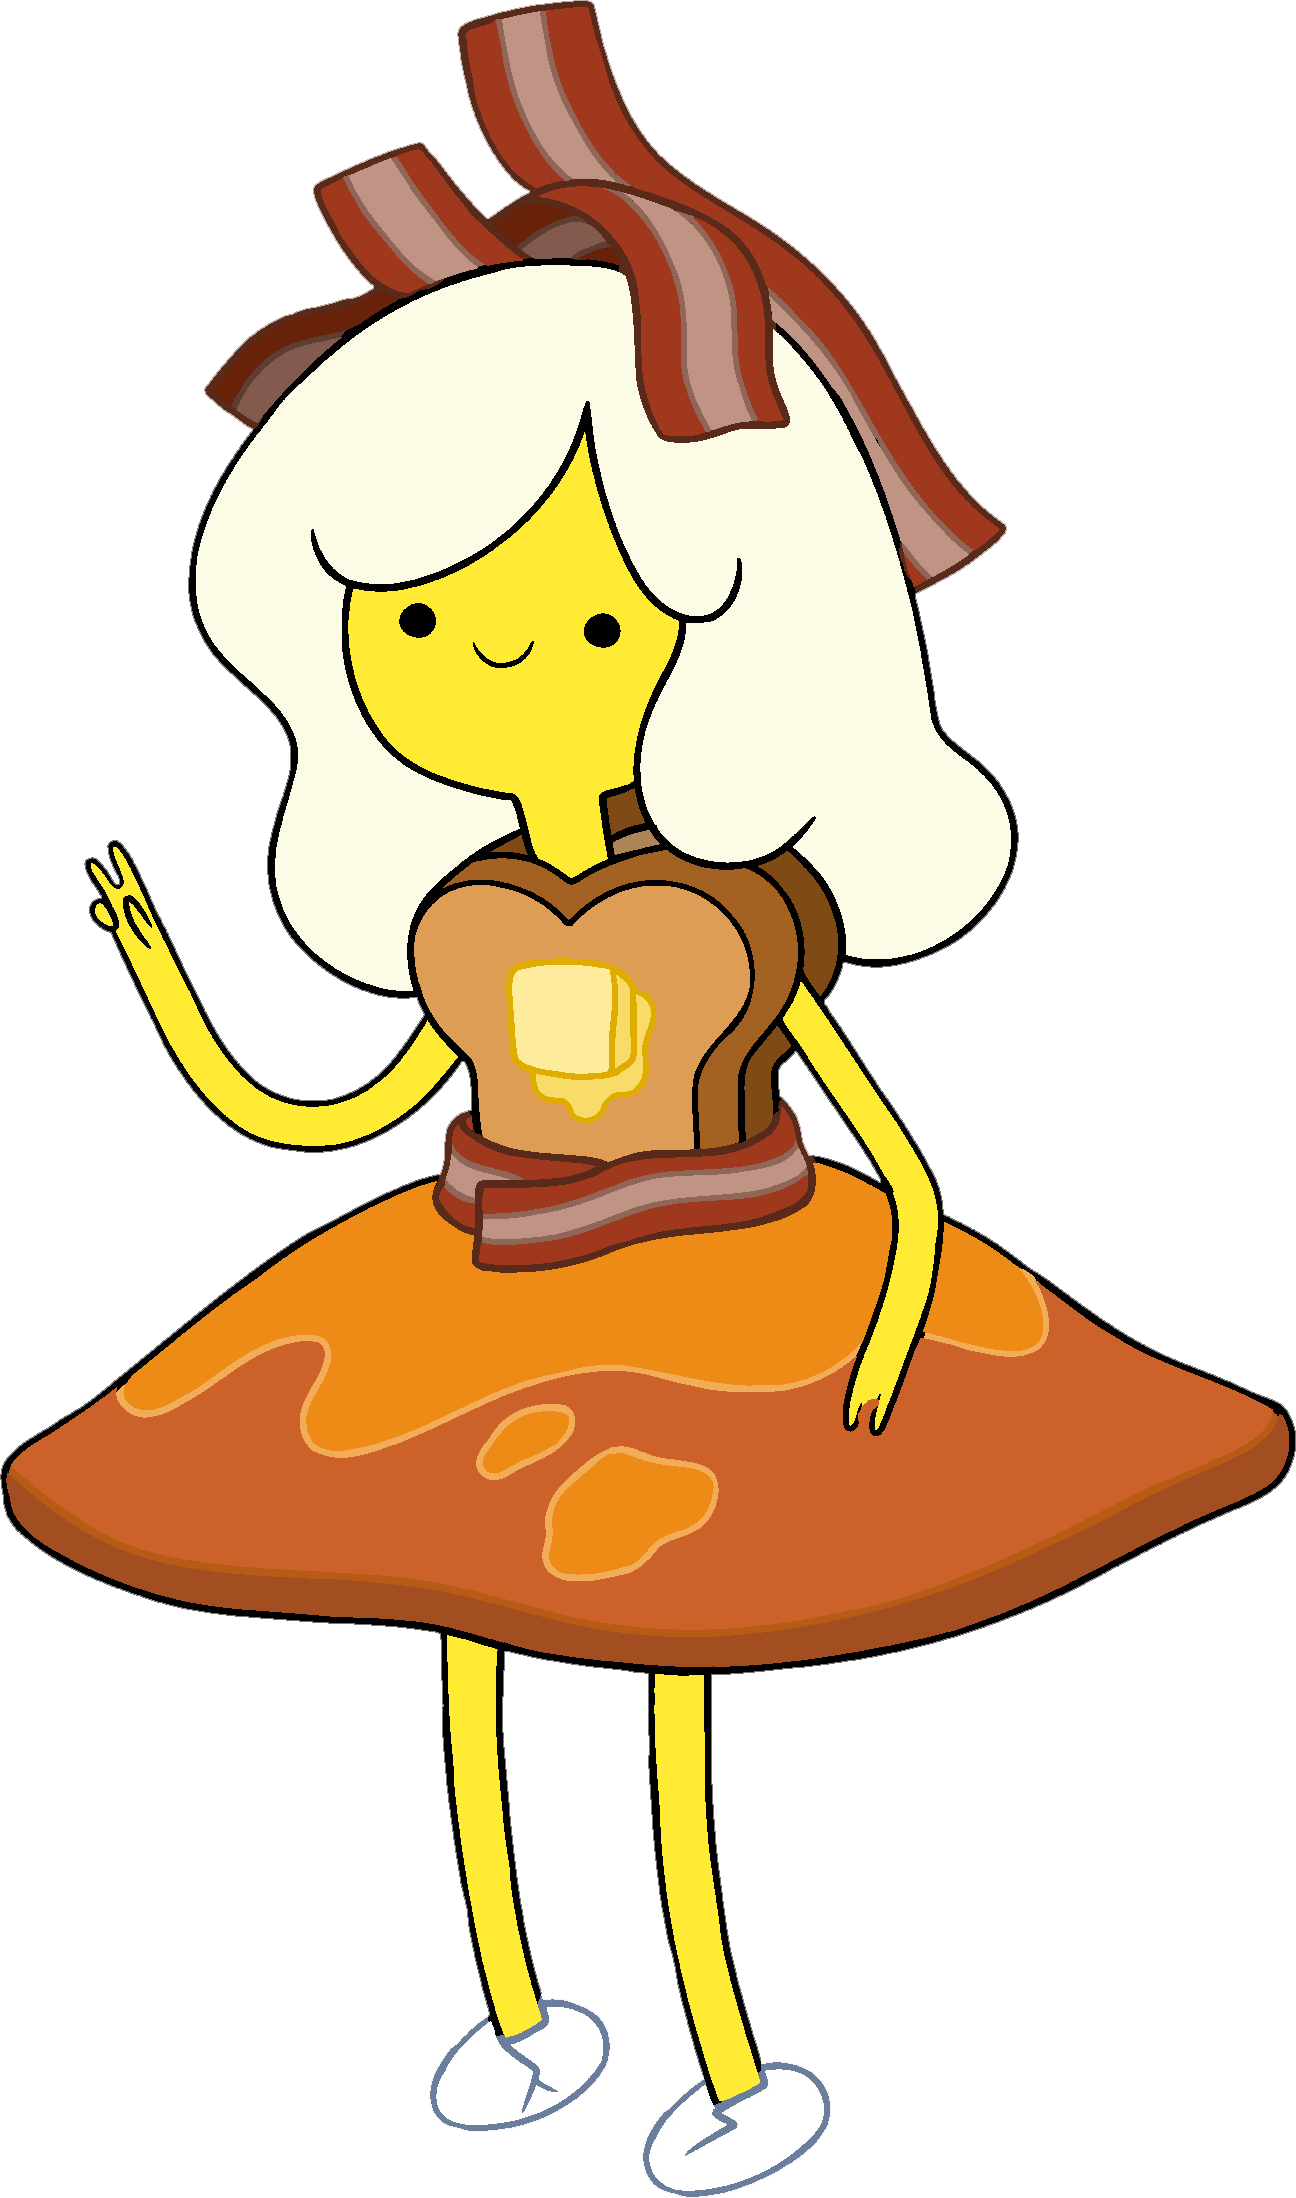 Breakfast Princess The Adventure Time Wiki Mathematical